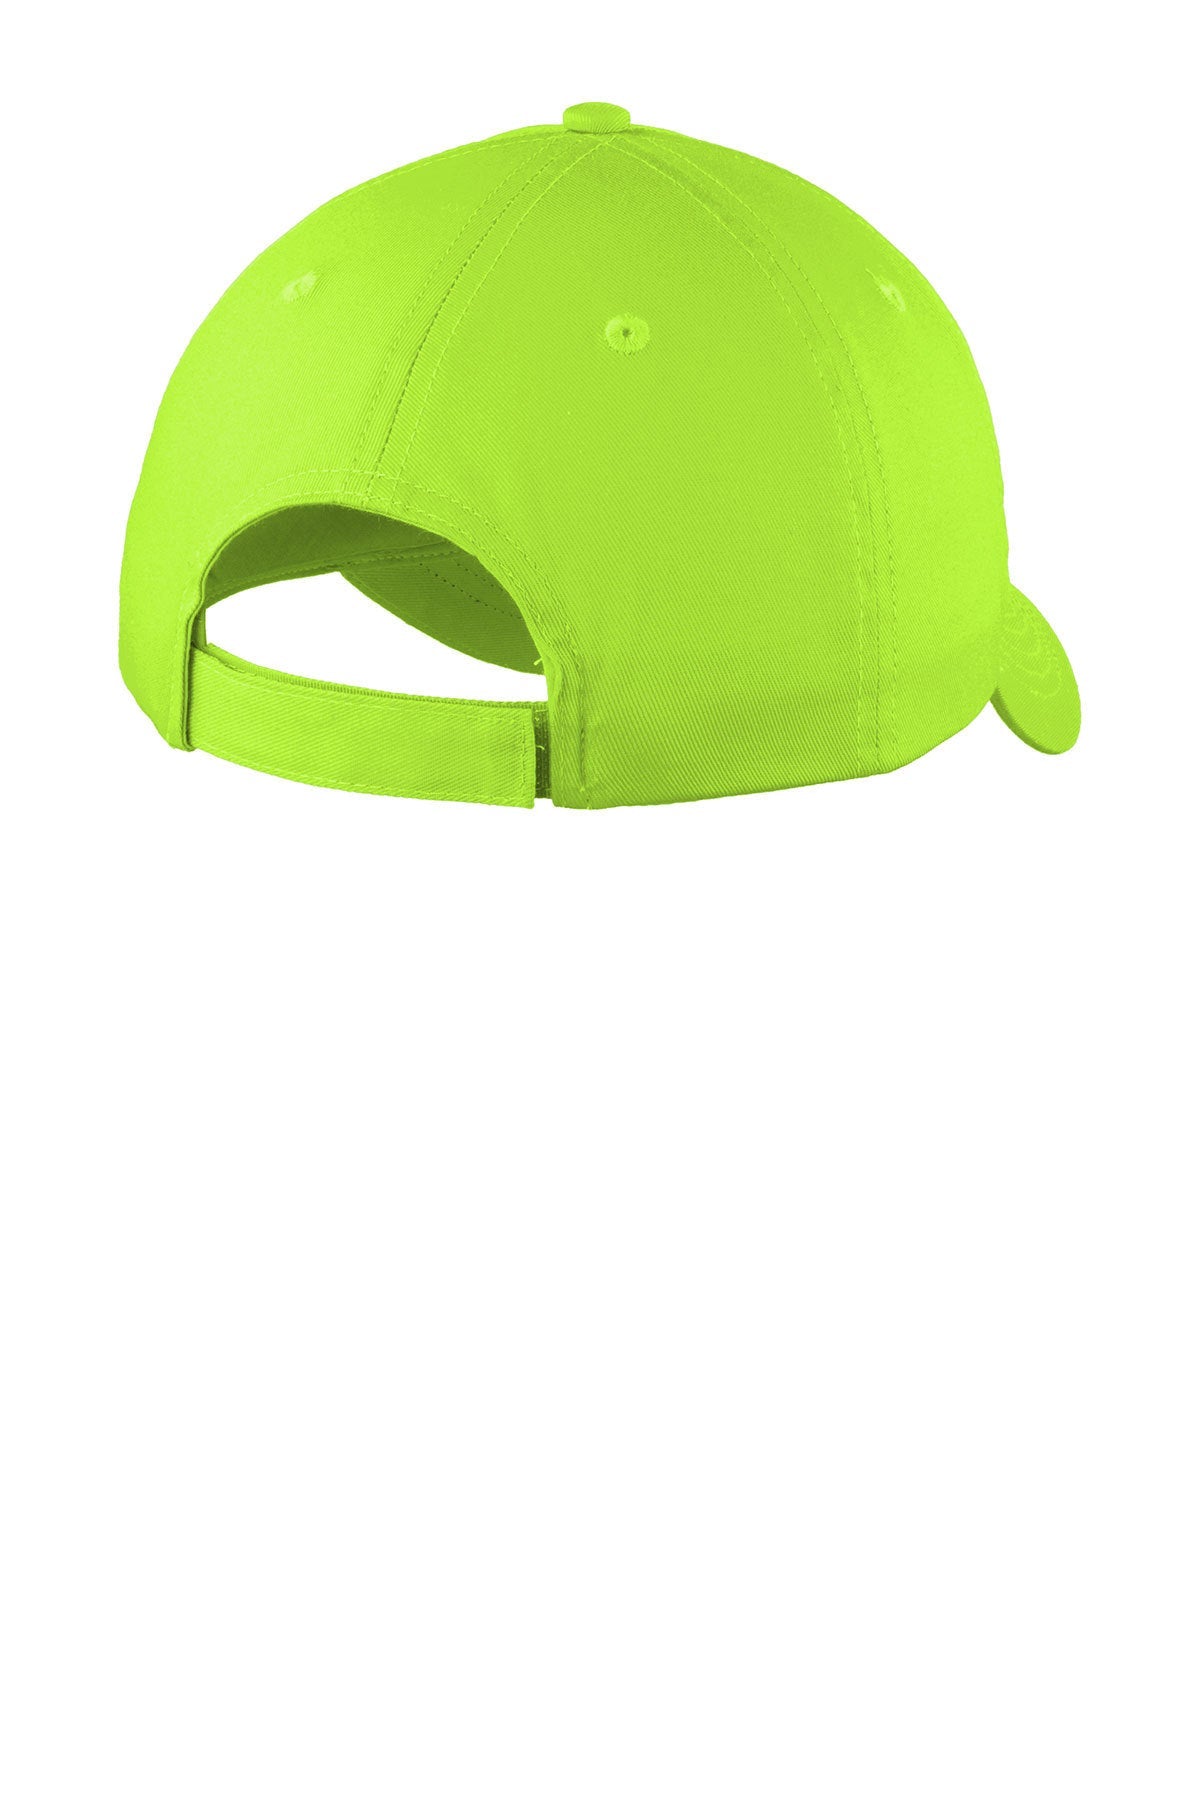 Port & Company Six Panel Twill Branded Caps, Lime